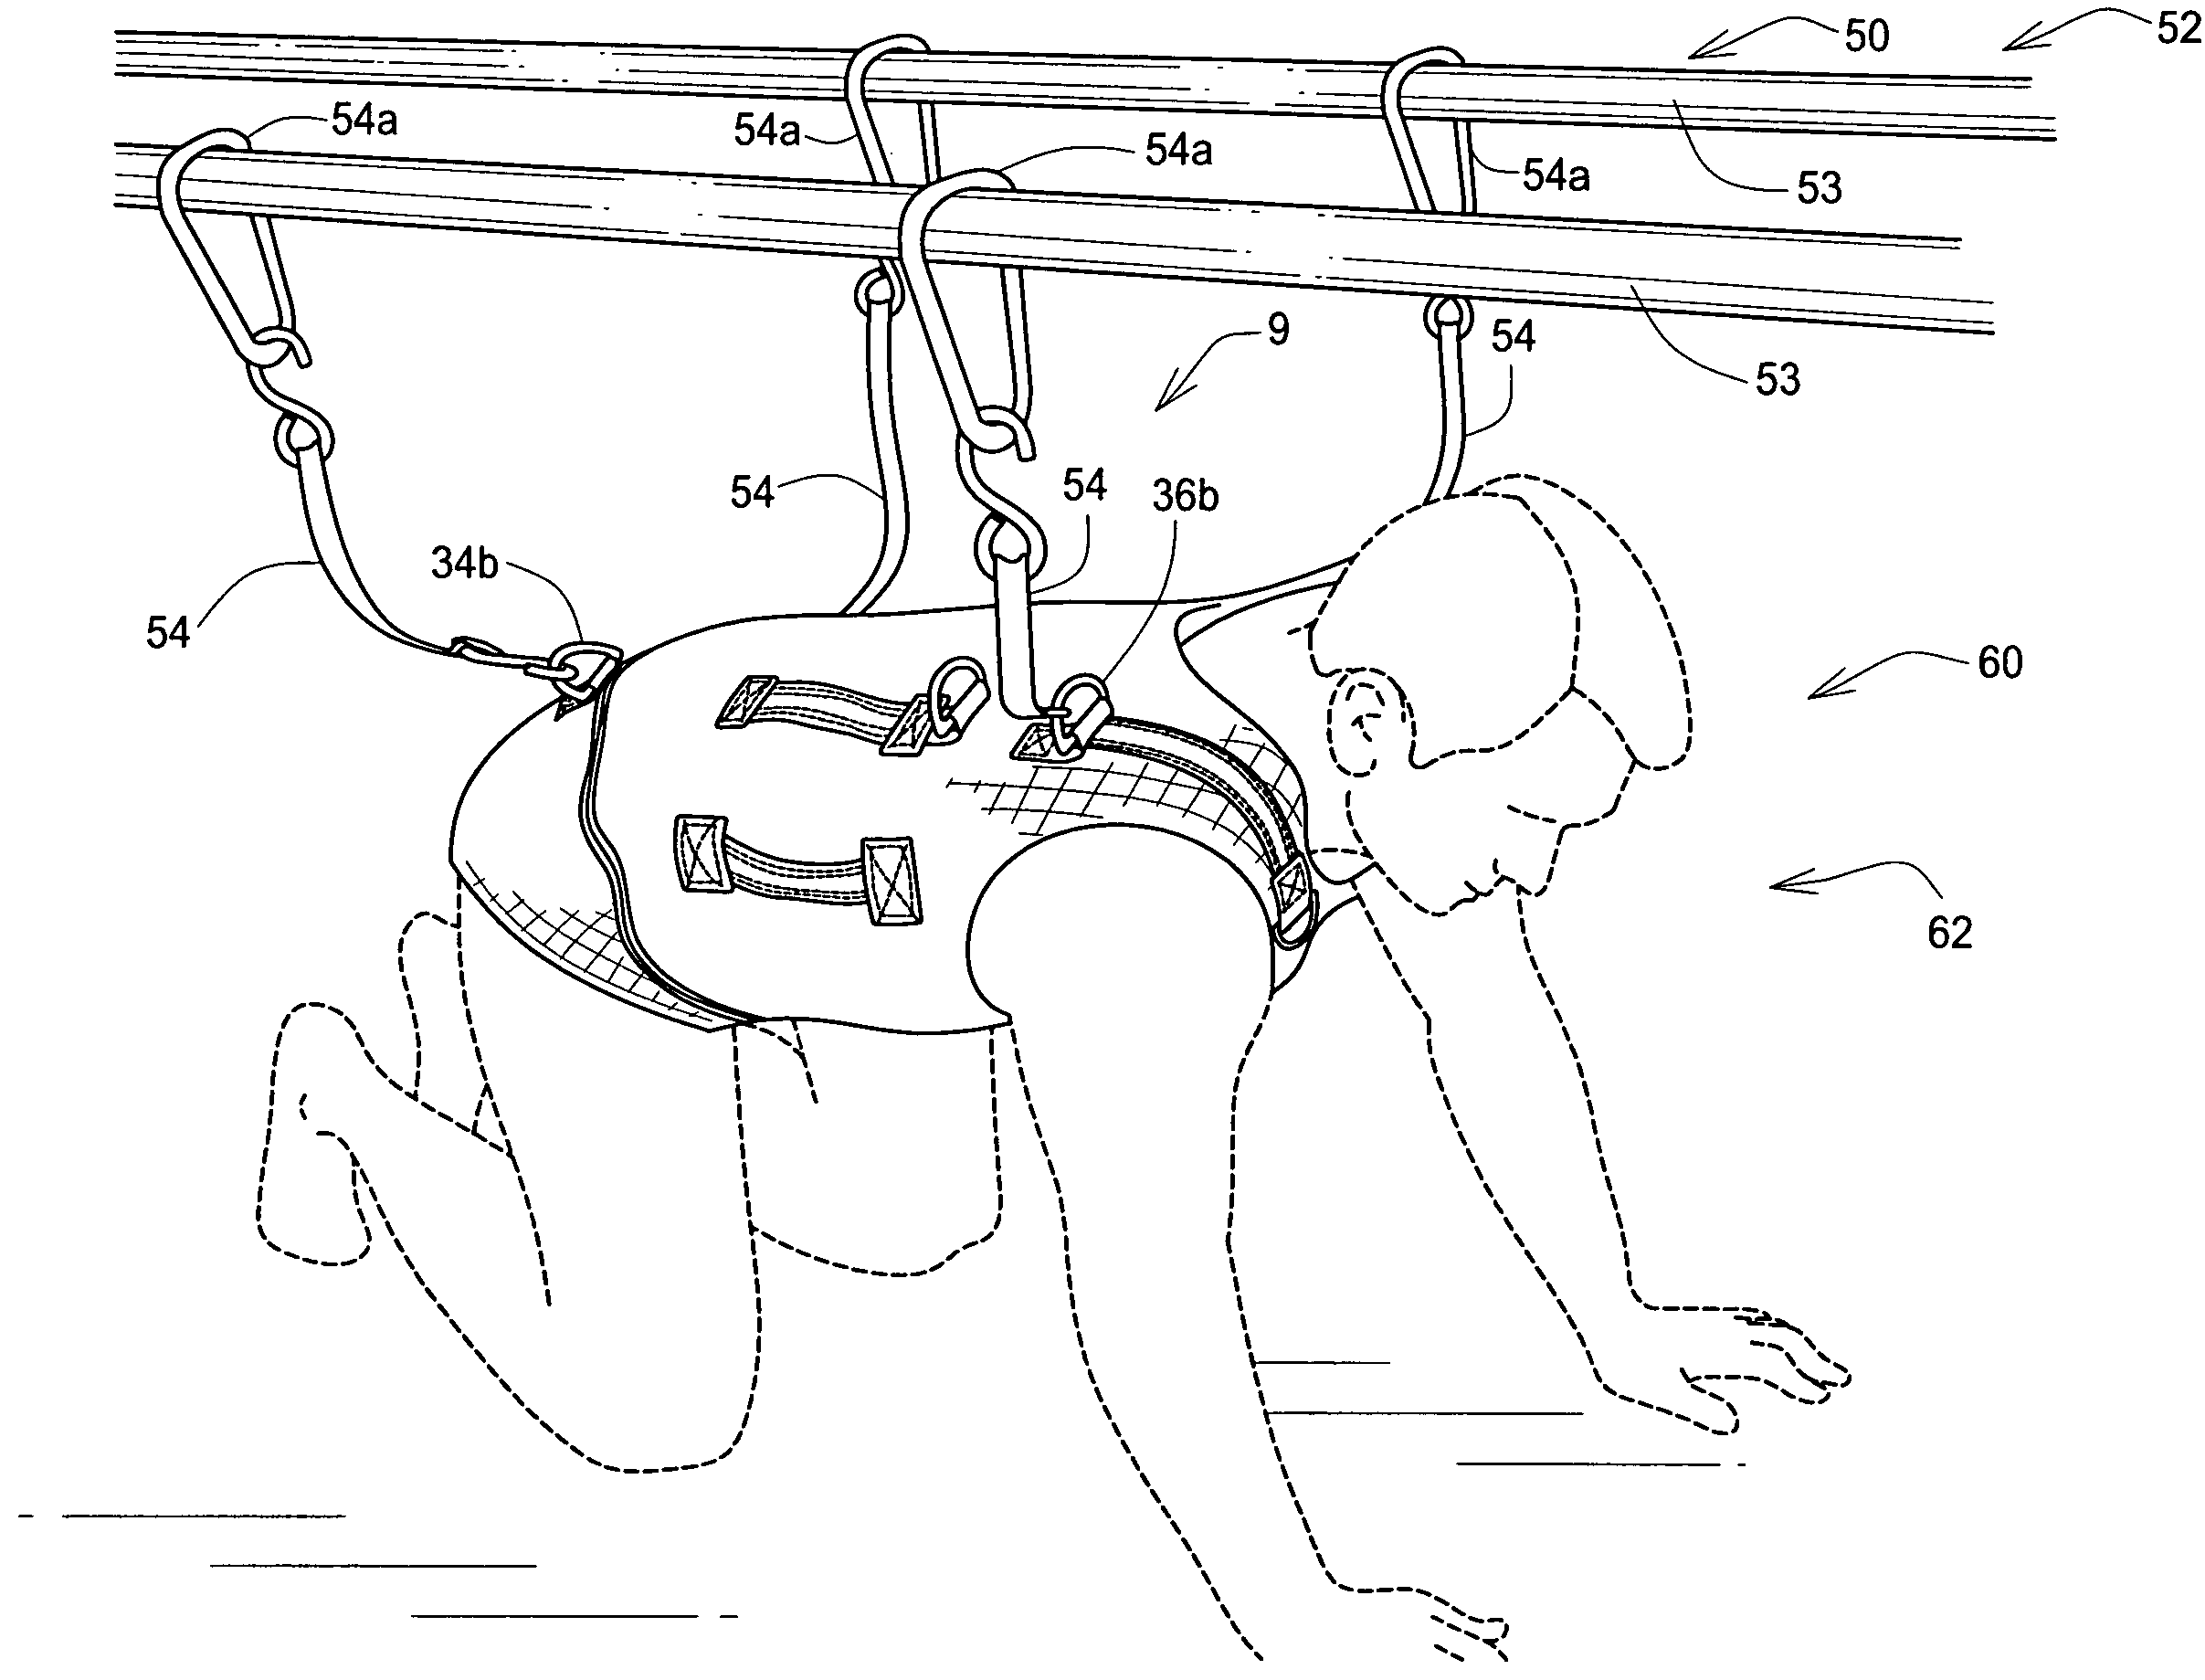 Unweighting assembly and support harness for unweighting a patient during rehabilitation